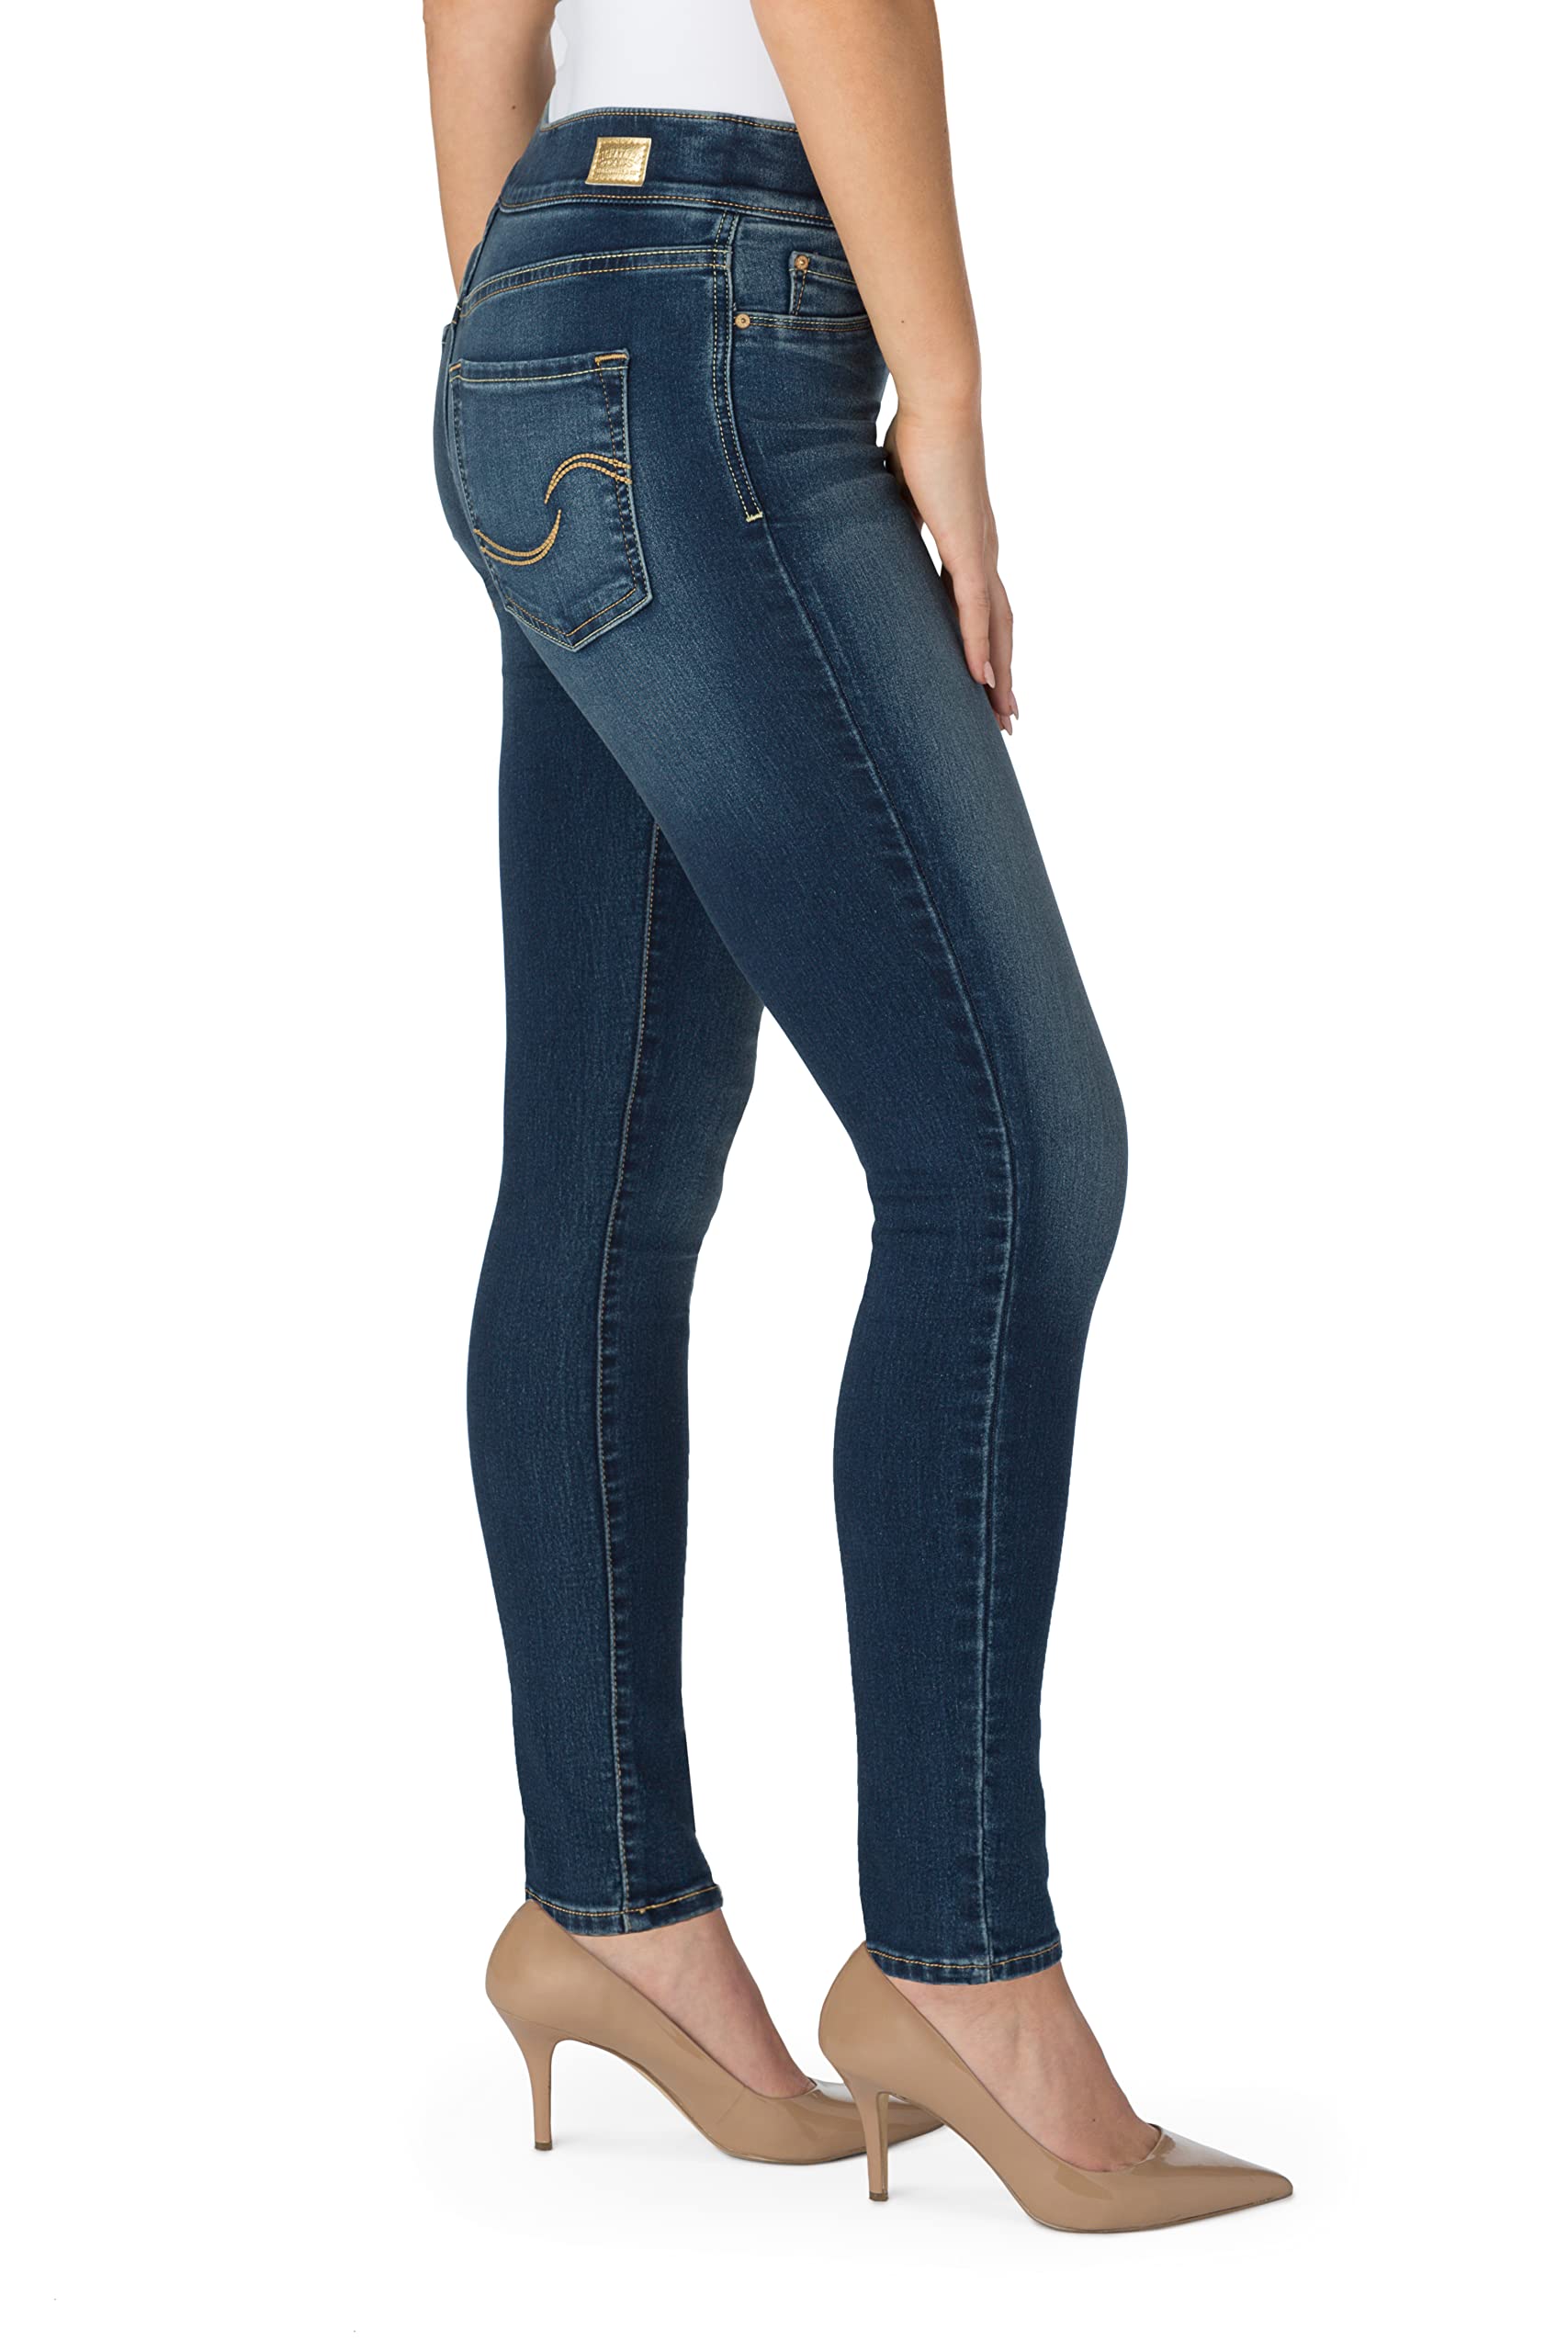 Signature by Levi Strauss & Co. Gold Label Women's Totally Shaping Pull-on Skinny Jeans (Available in Plus Size)